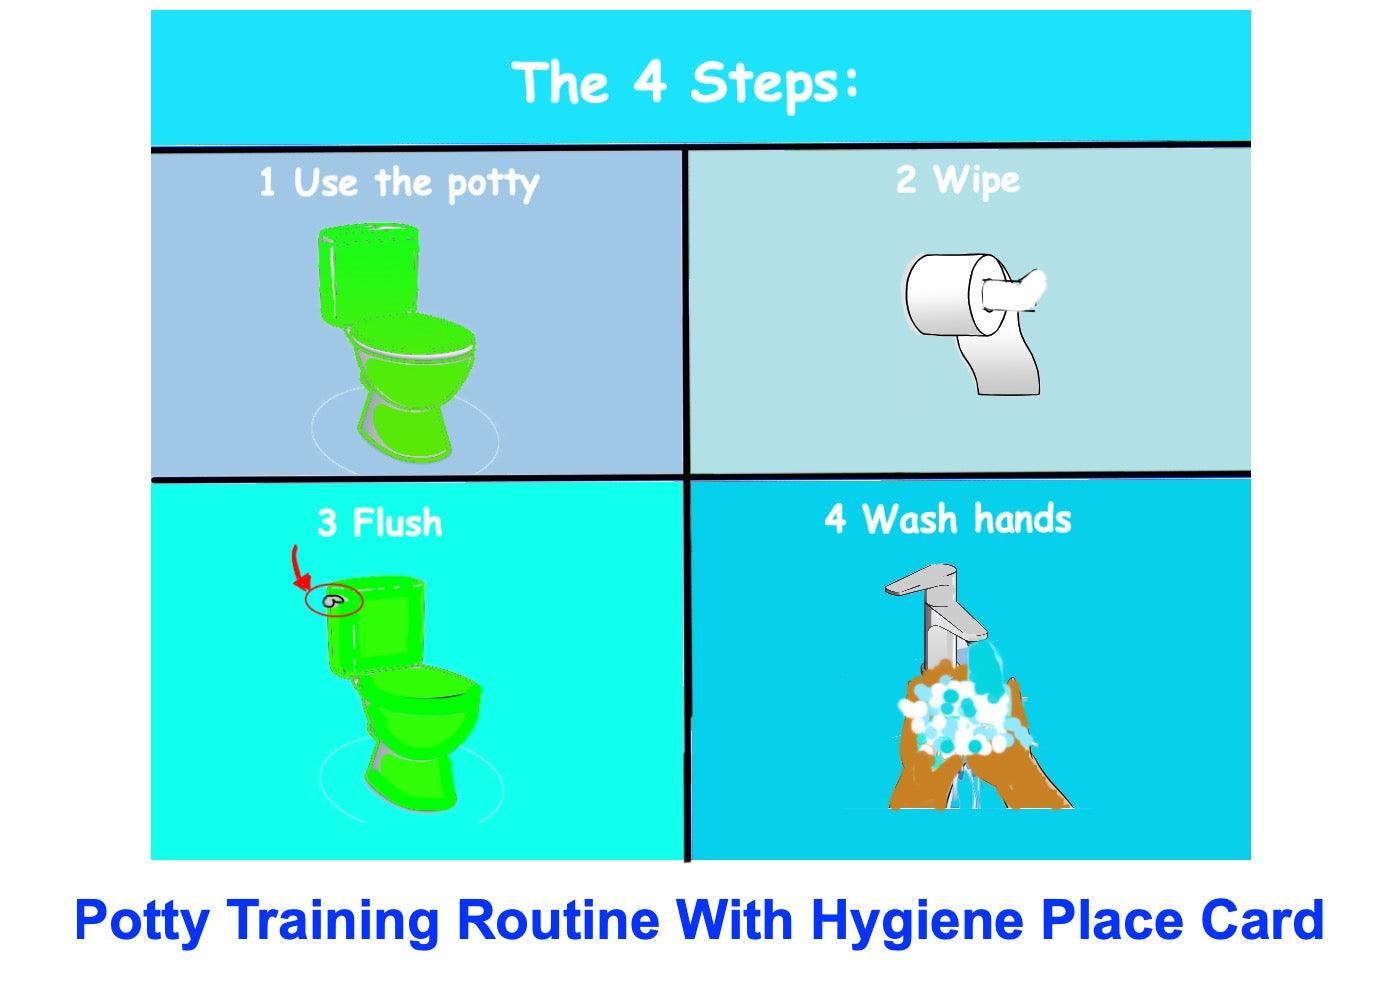 "Potty training routine with hygiene placecard"